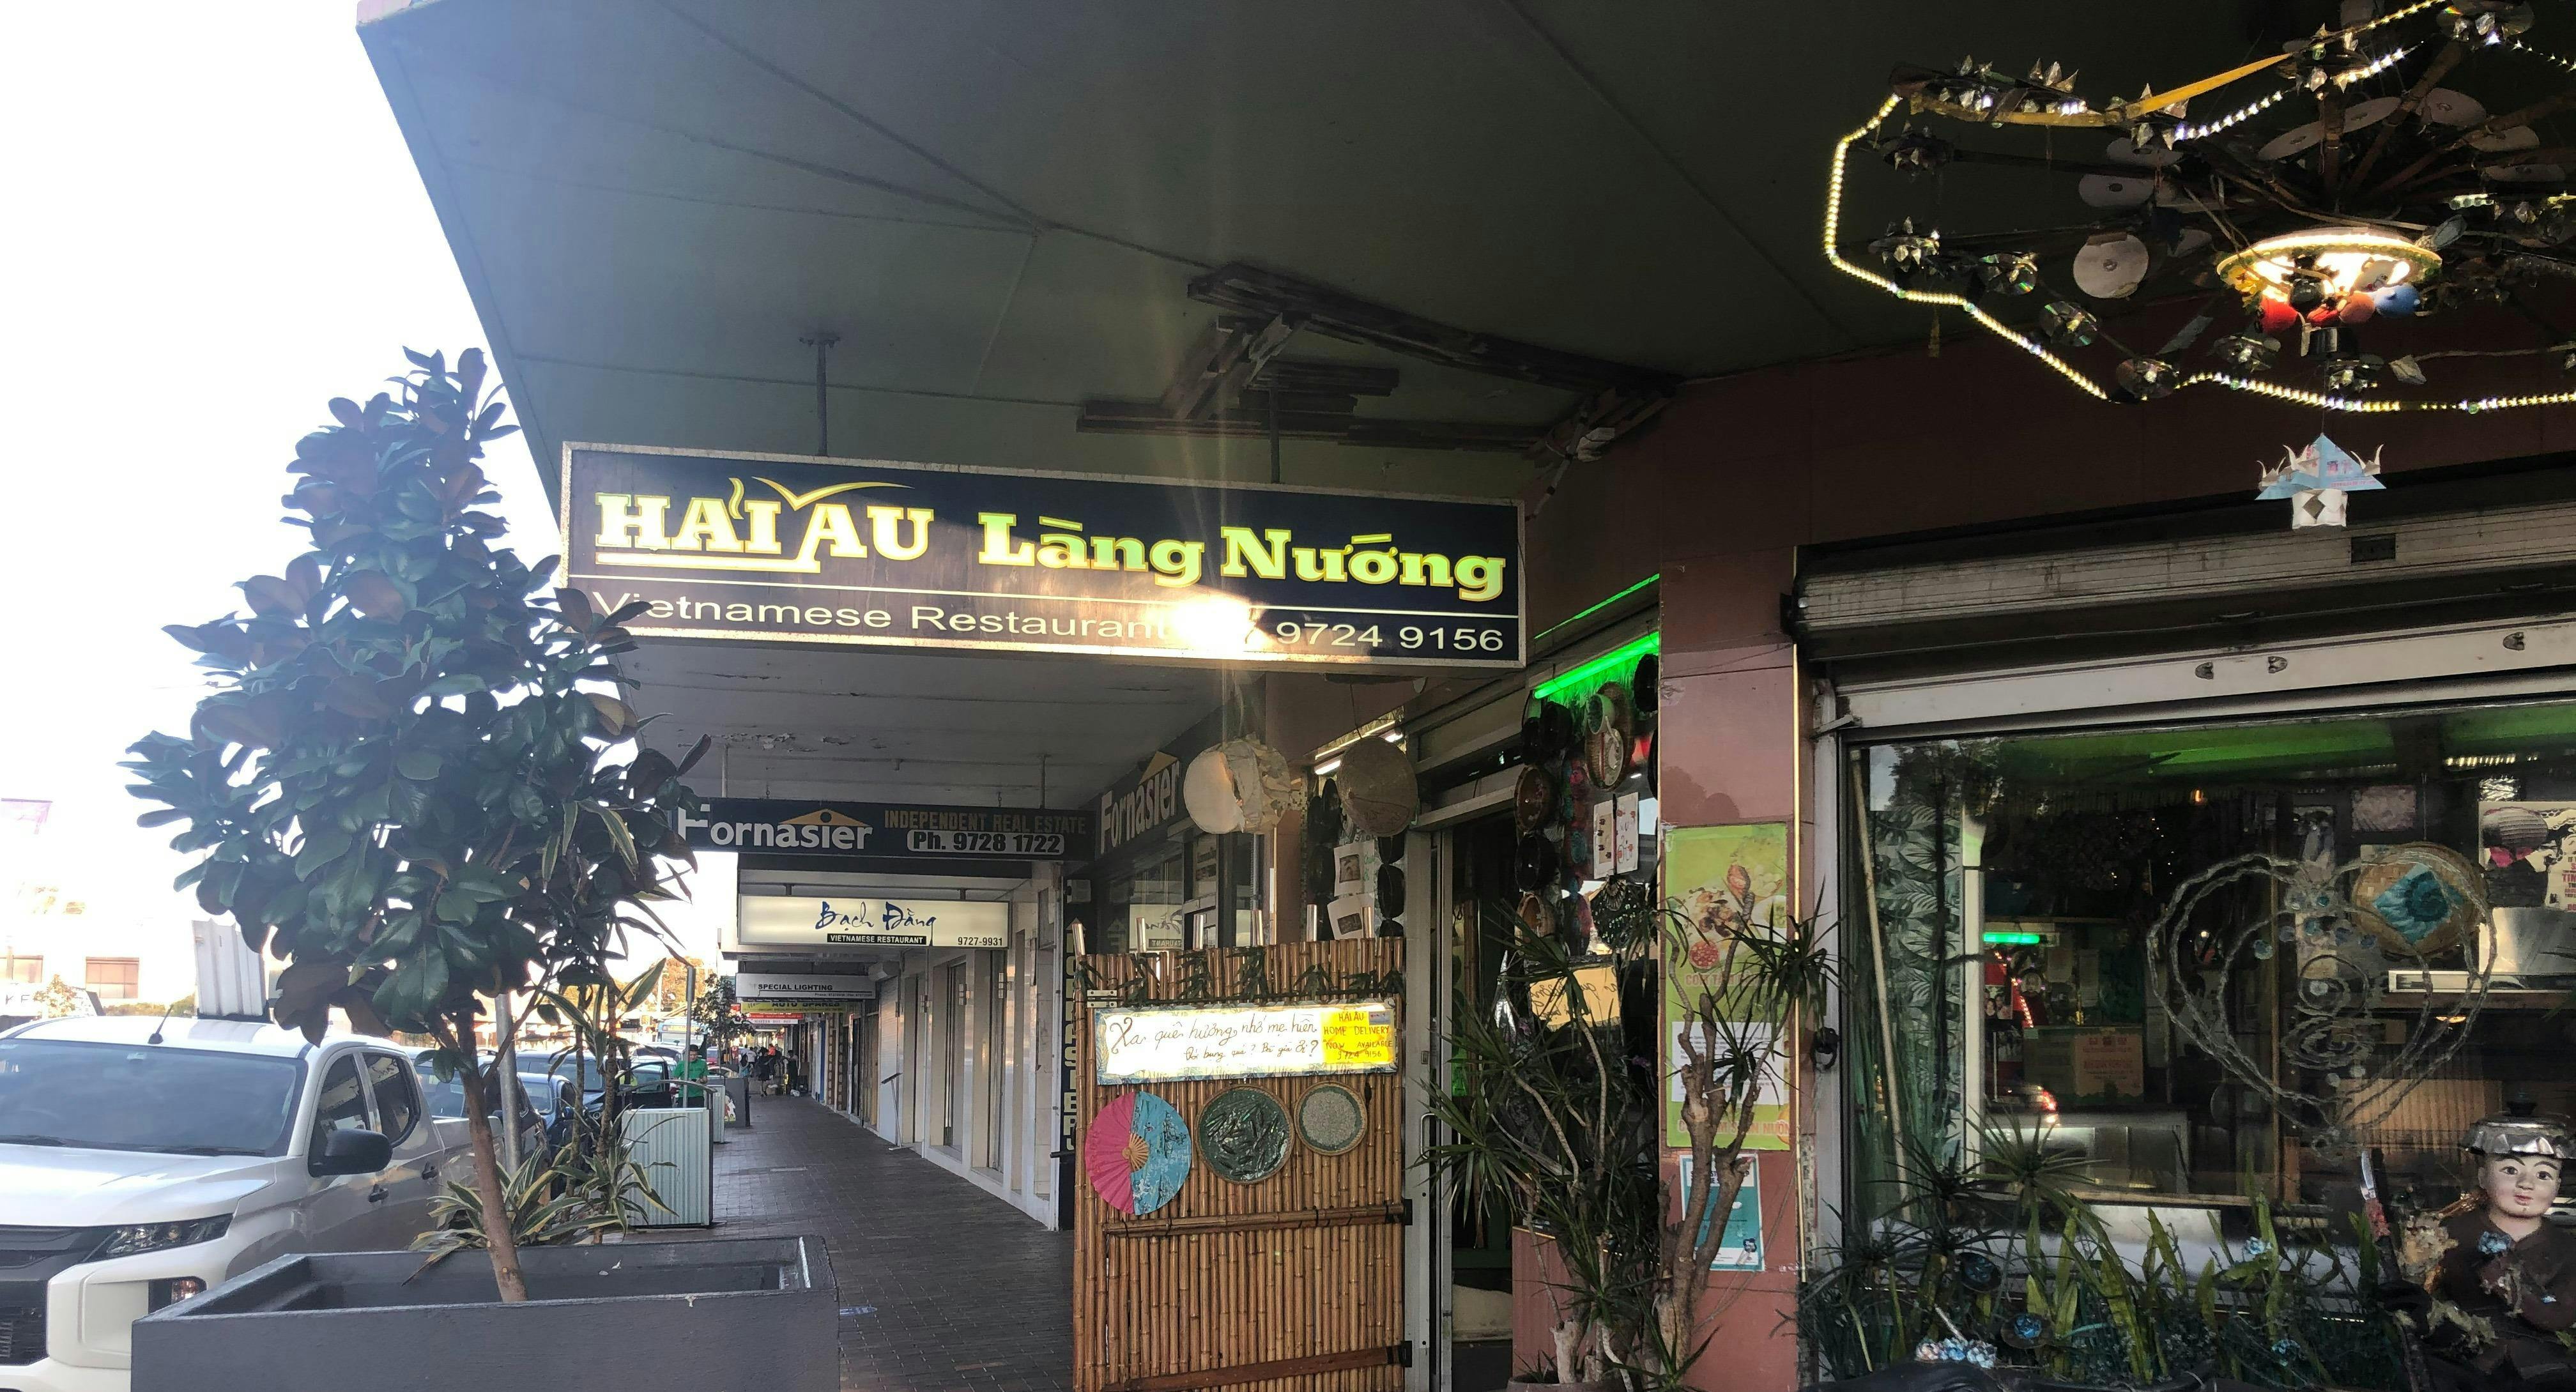 Photo of restaurant Hai Au Lang Nuong in Canley Vale, Sydney